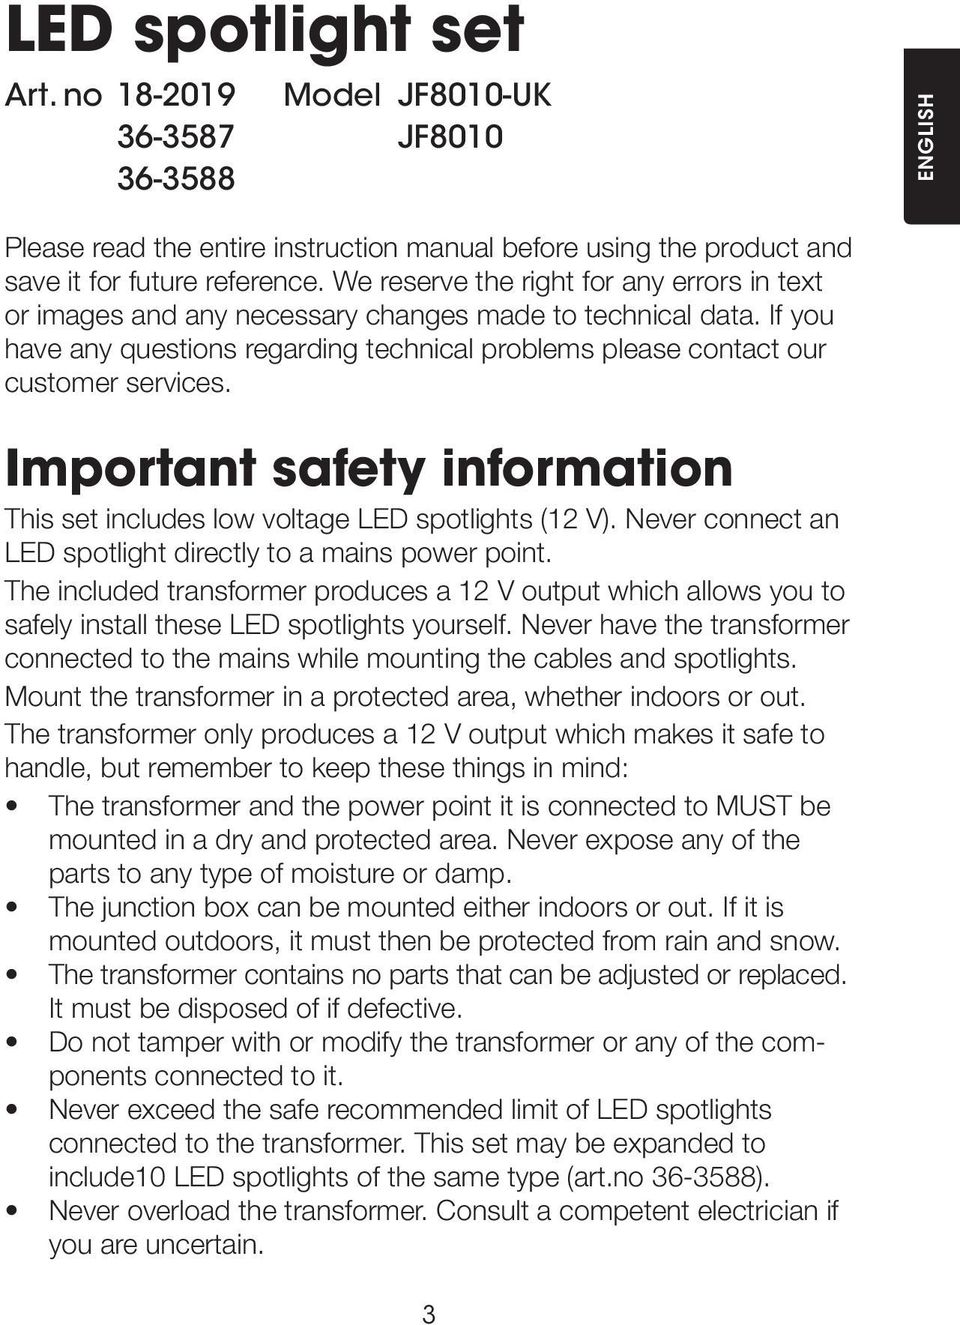 Important safety information This set includes low voltage LED spotlights (12 V). Never connect an LED spotlight directly to a mains power point.